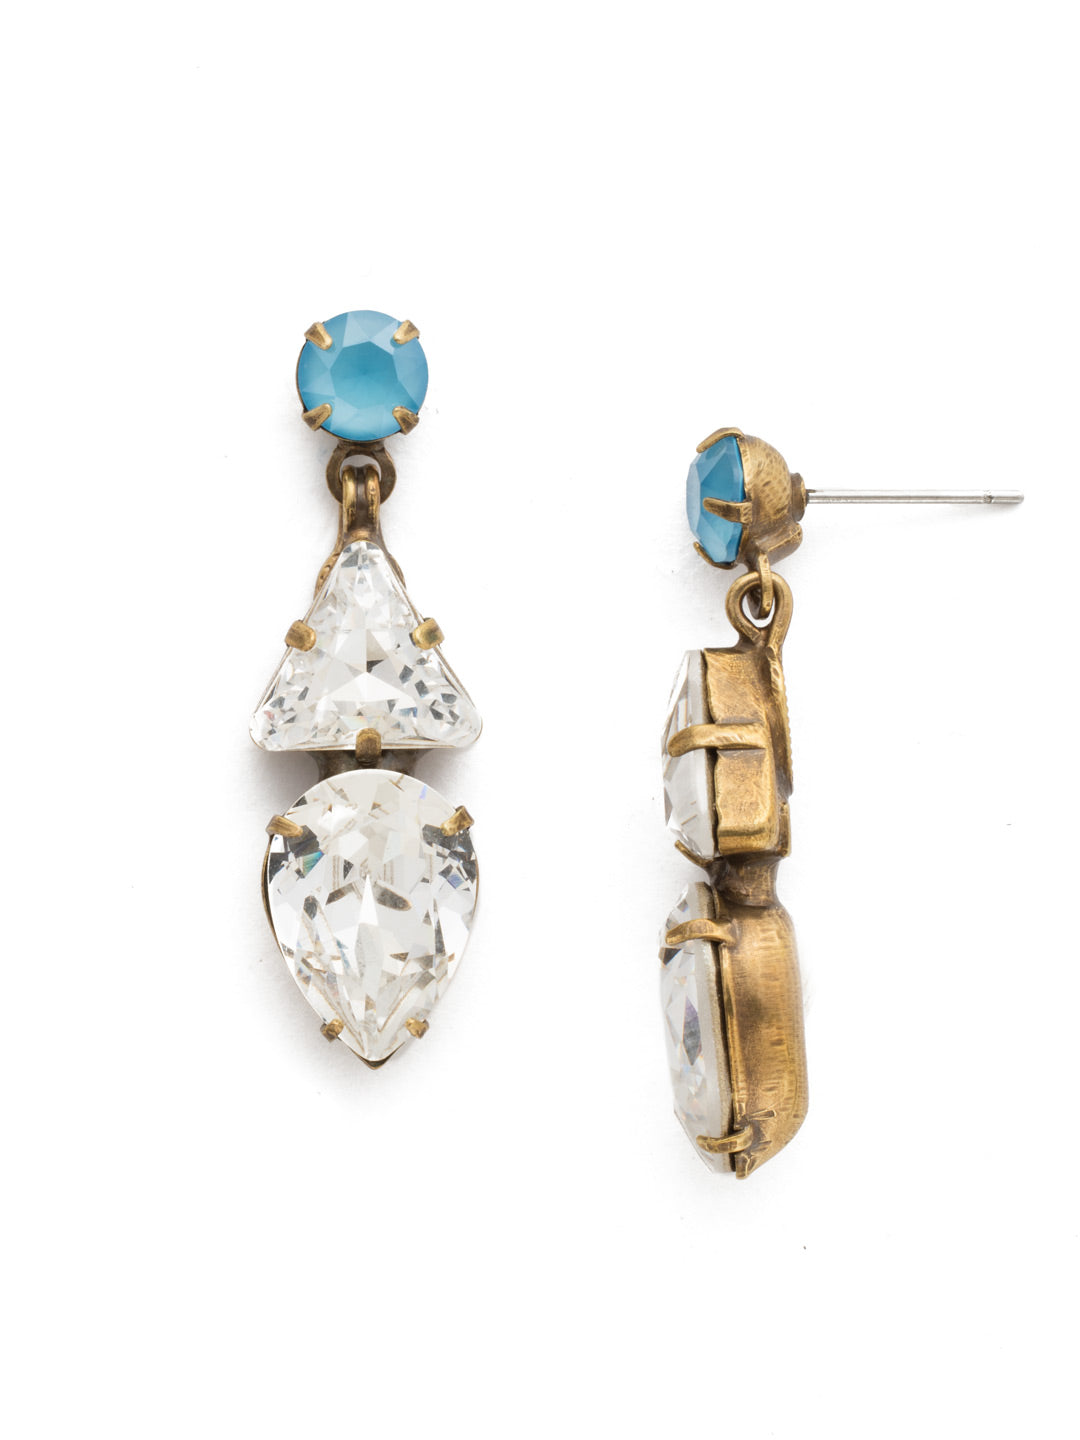 Trixie Dangle Earrings - EDM34AGSMR - <p>Elevate your style with the Trixie Dangle Earrings, showcasing a chic round crystal on a post, elegantly complemented by a dangling triangle and pear-cut crystal. From Sorrelli's Denim Blue collection in our Antique Gold-tone finish.</p>